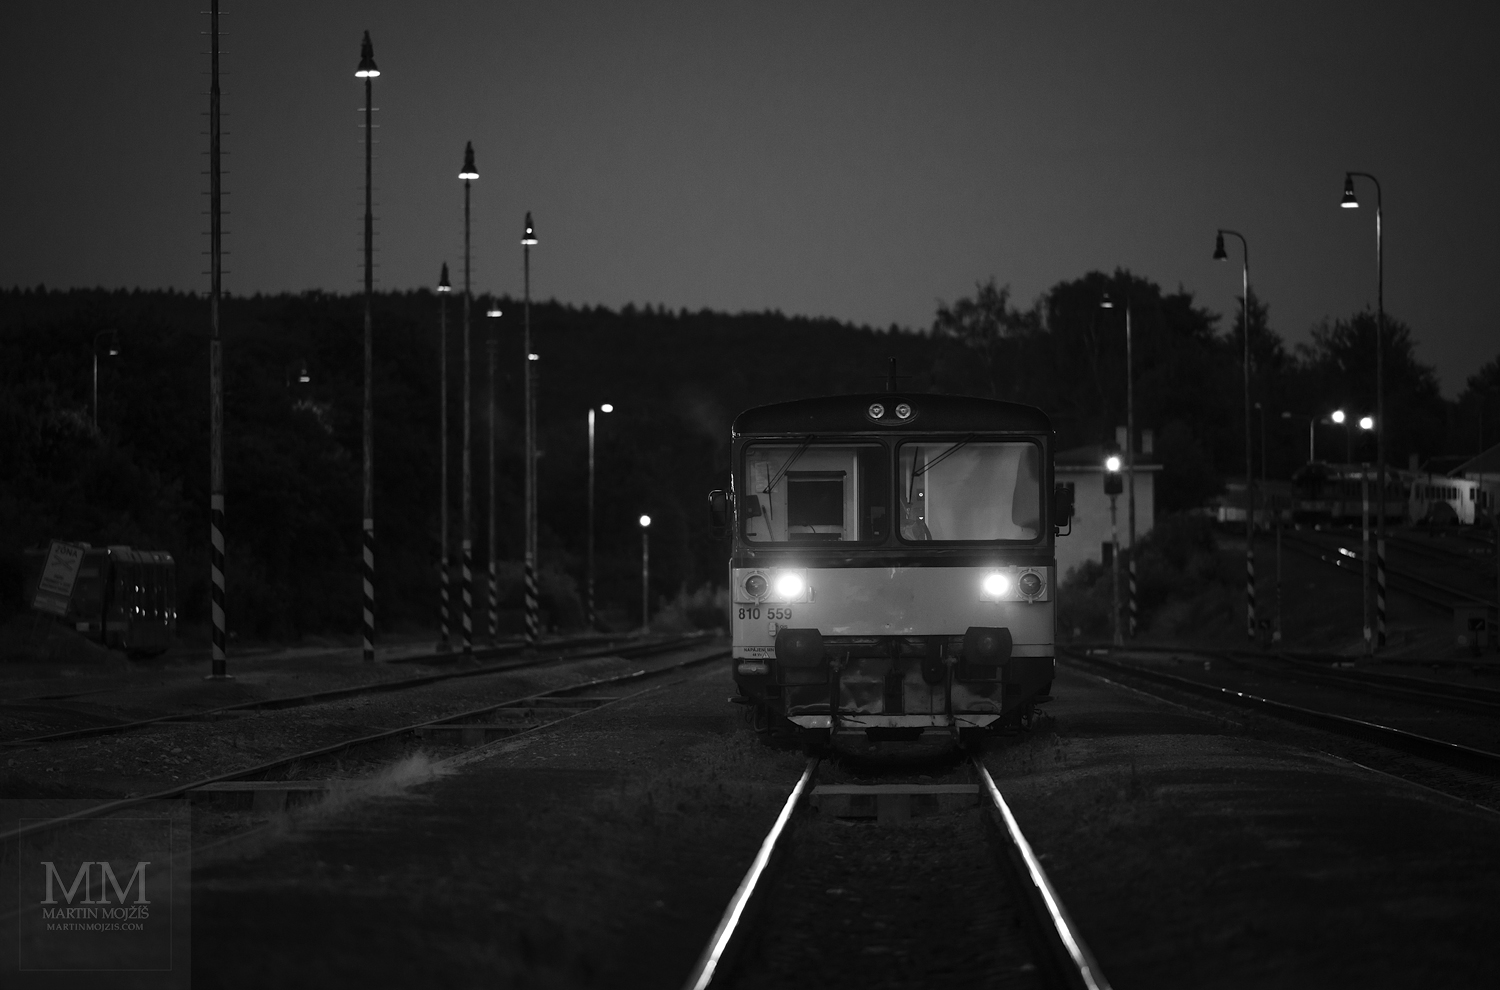 A tiny engine train and a evening railway station. Fine art black and white photograph EVENING TINY ENGINE TRAIN II., photographed by Martin Mojzis.